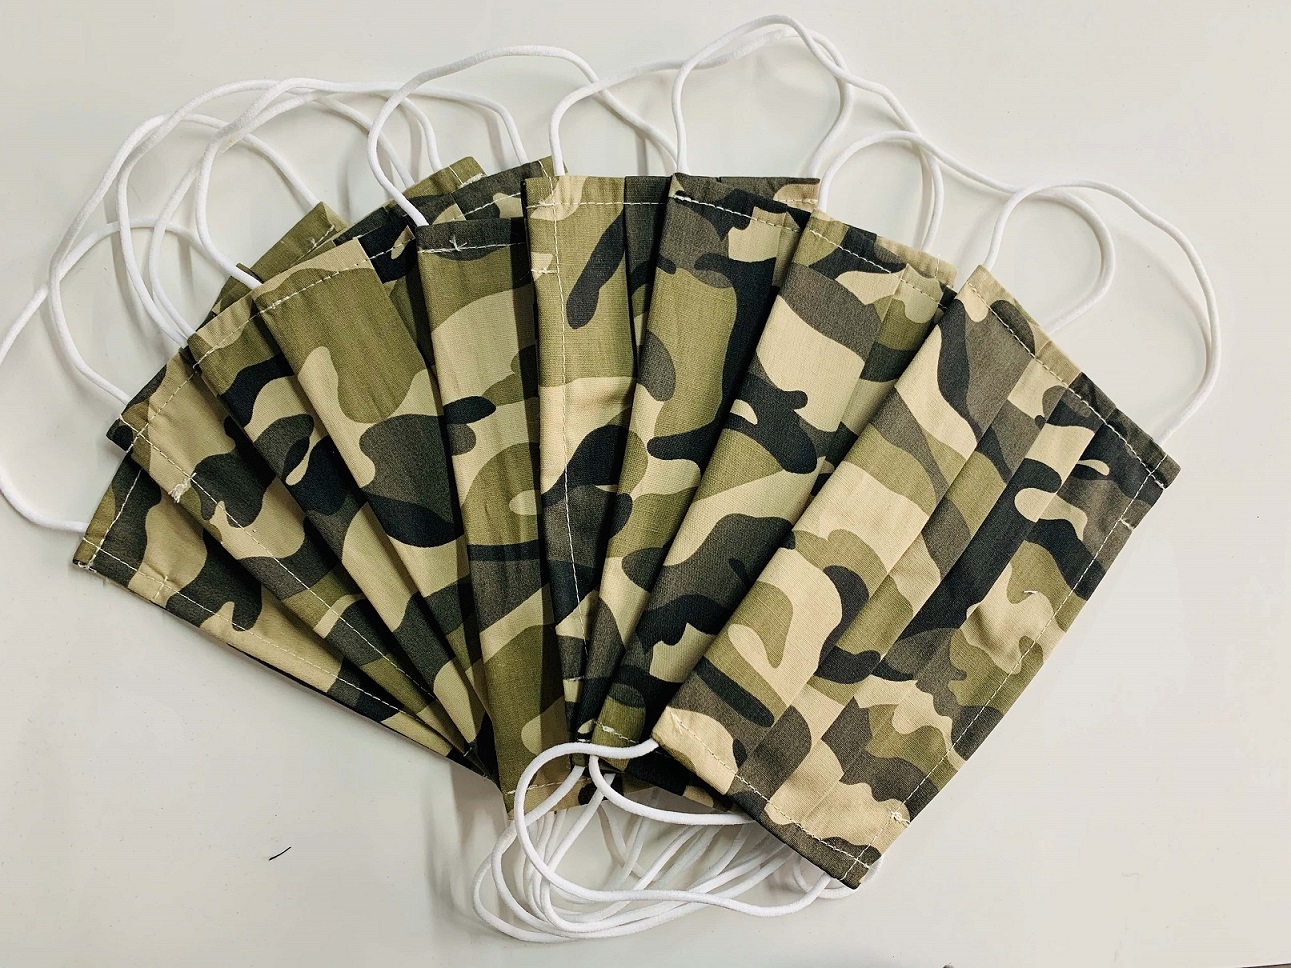 Reusable Dust Mask Fabric Cotton Camouflage Masks for Sale Wholesale Factpry Mask Supplier